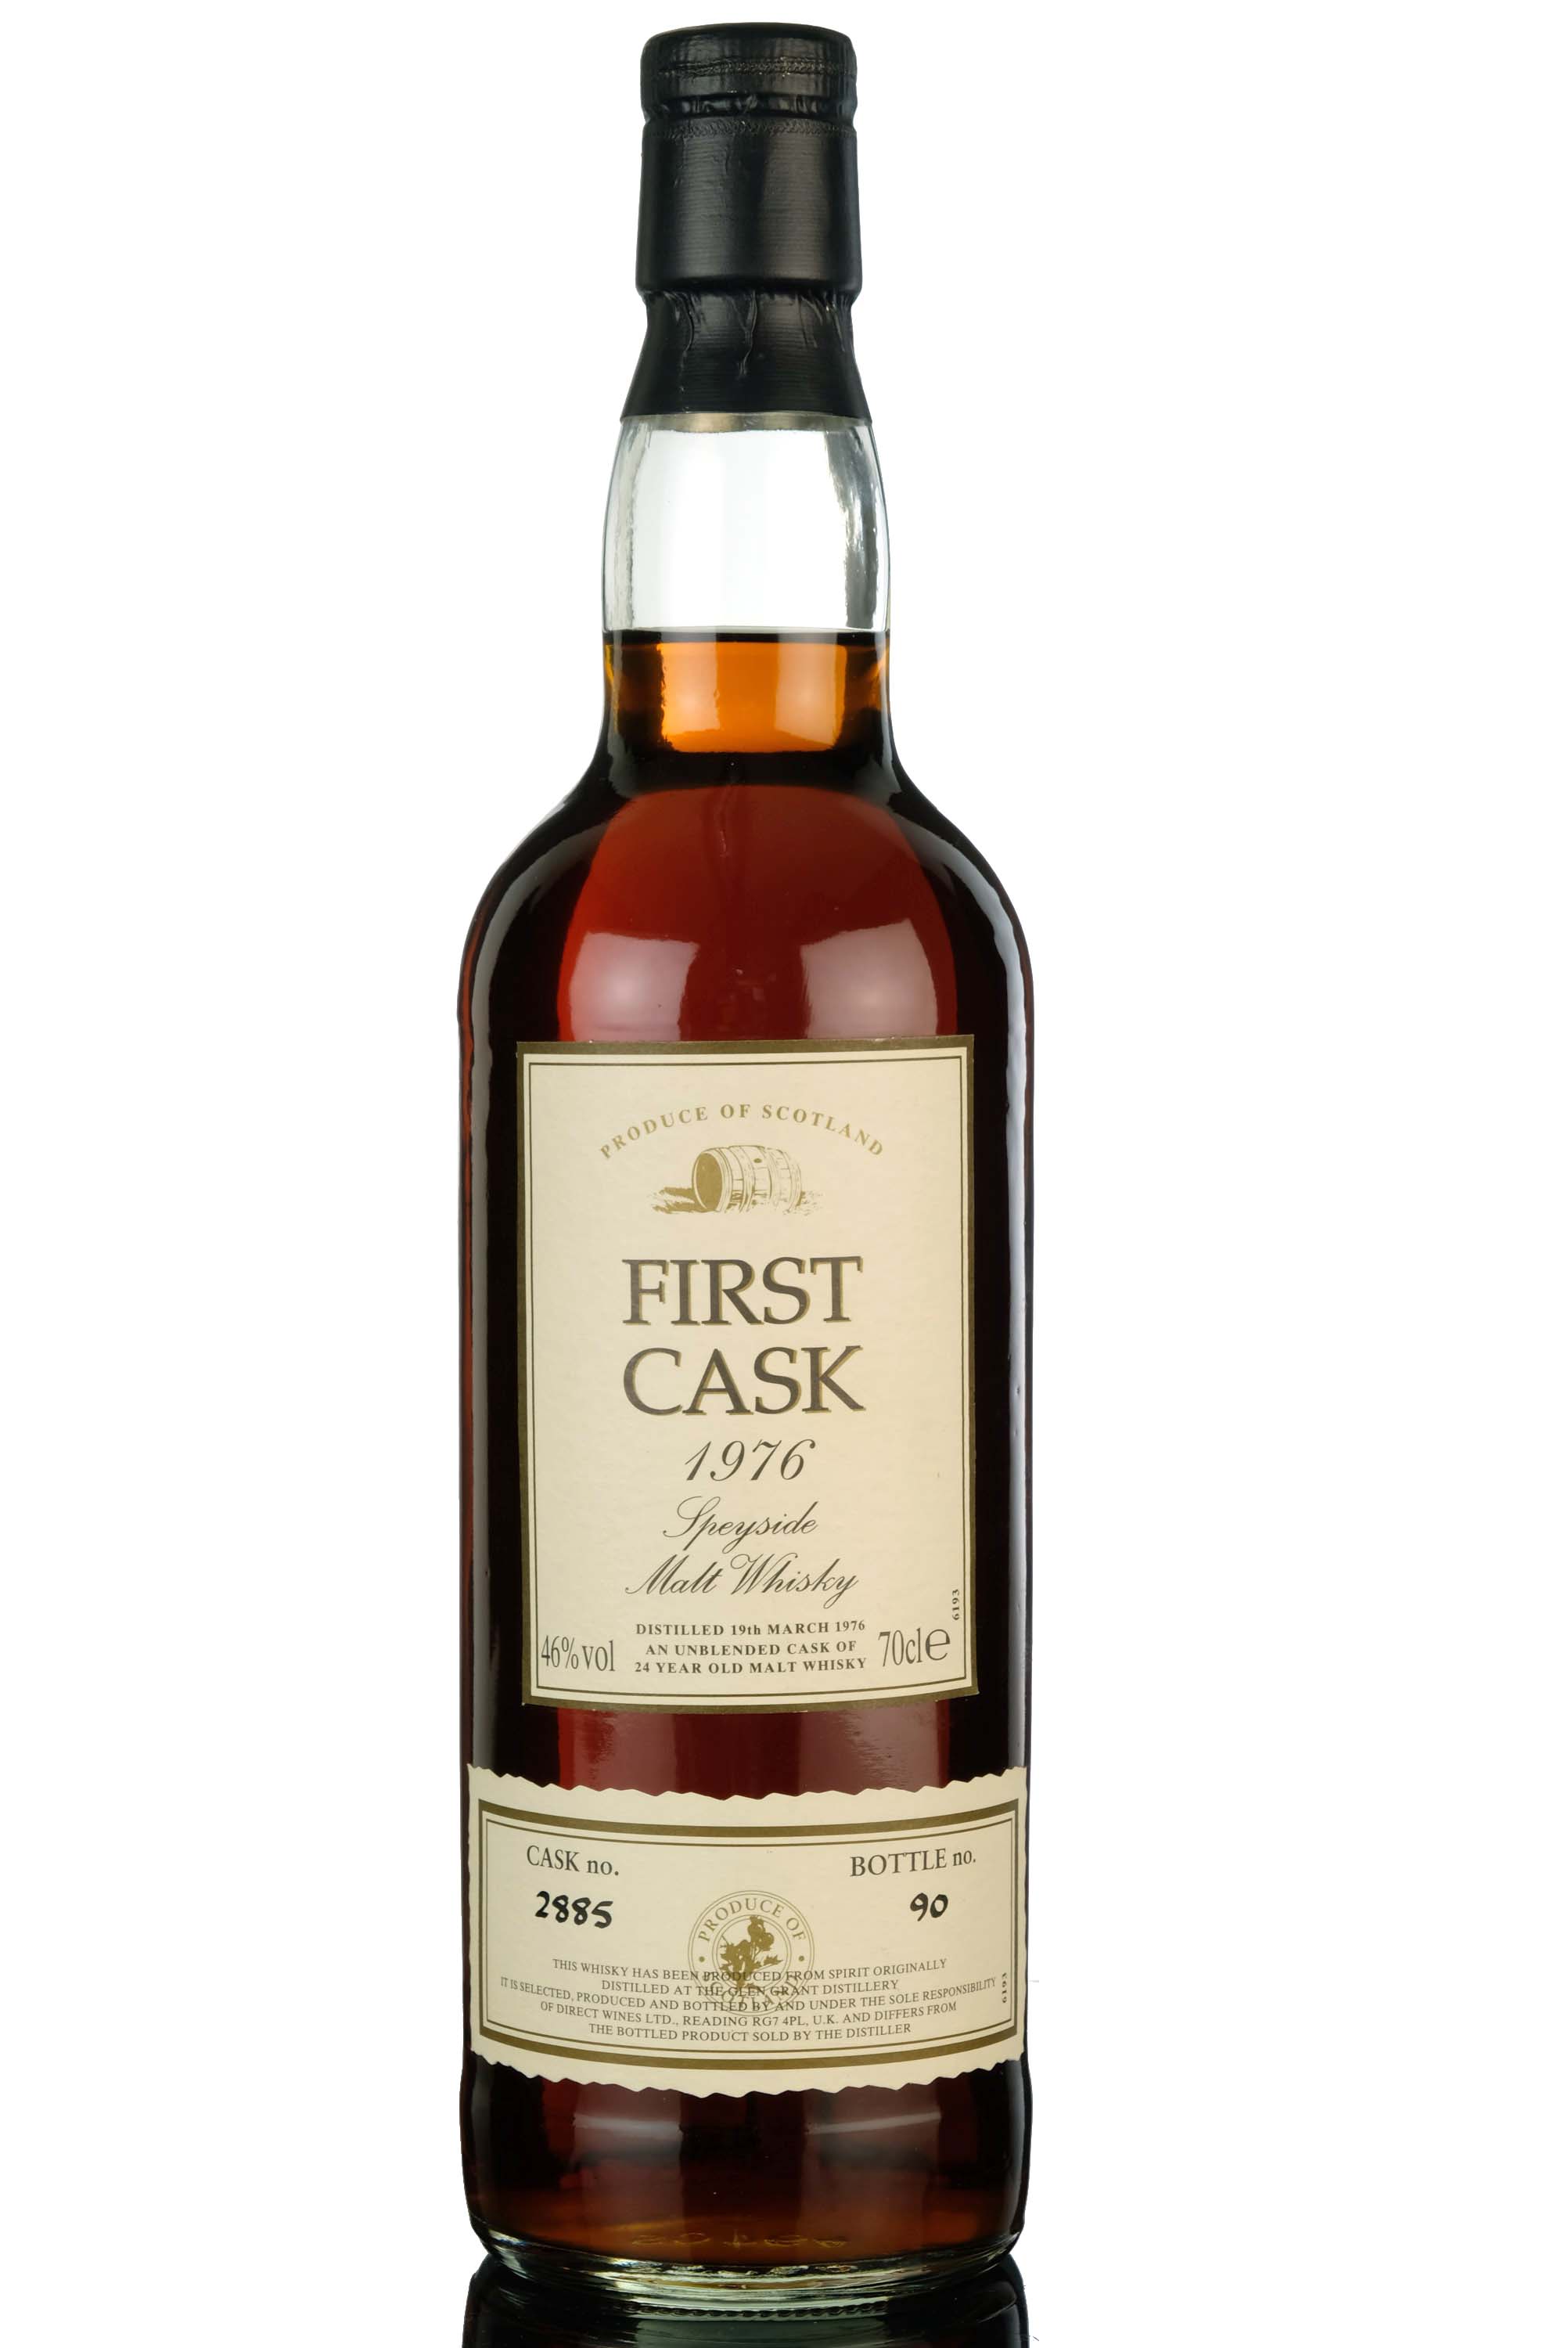 Glen Grant 1976 - 24 Year Old - First Cask 2885